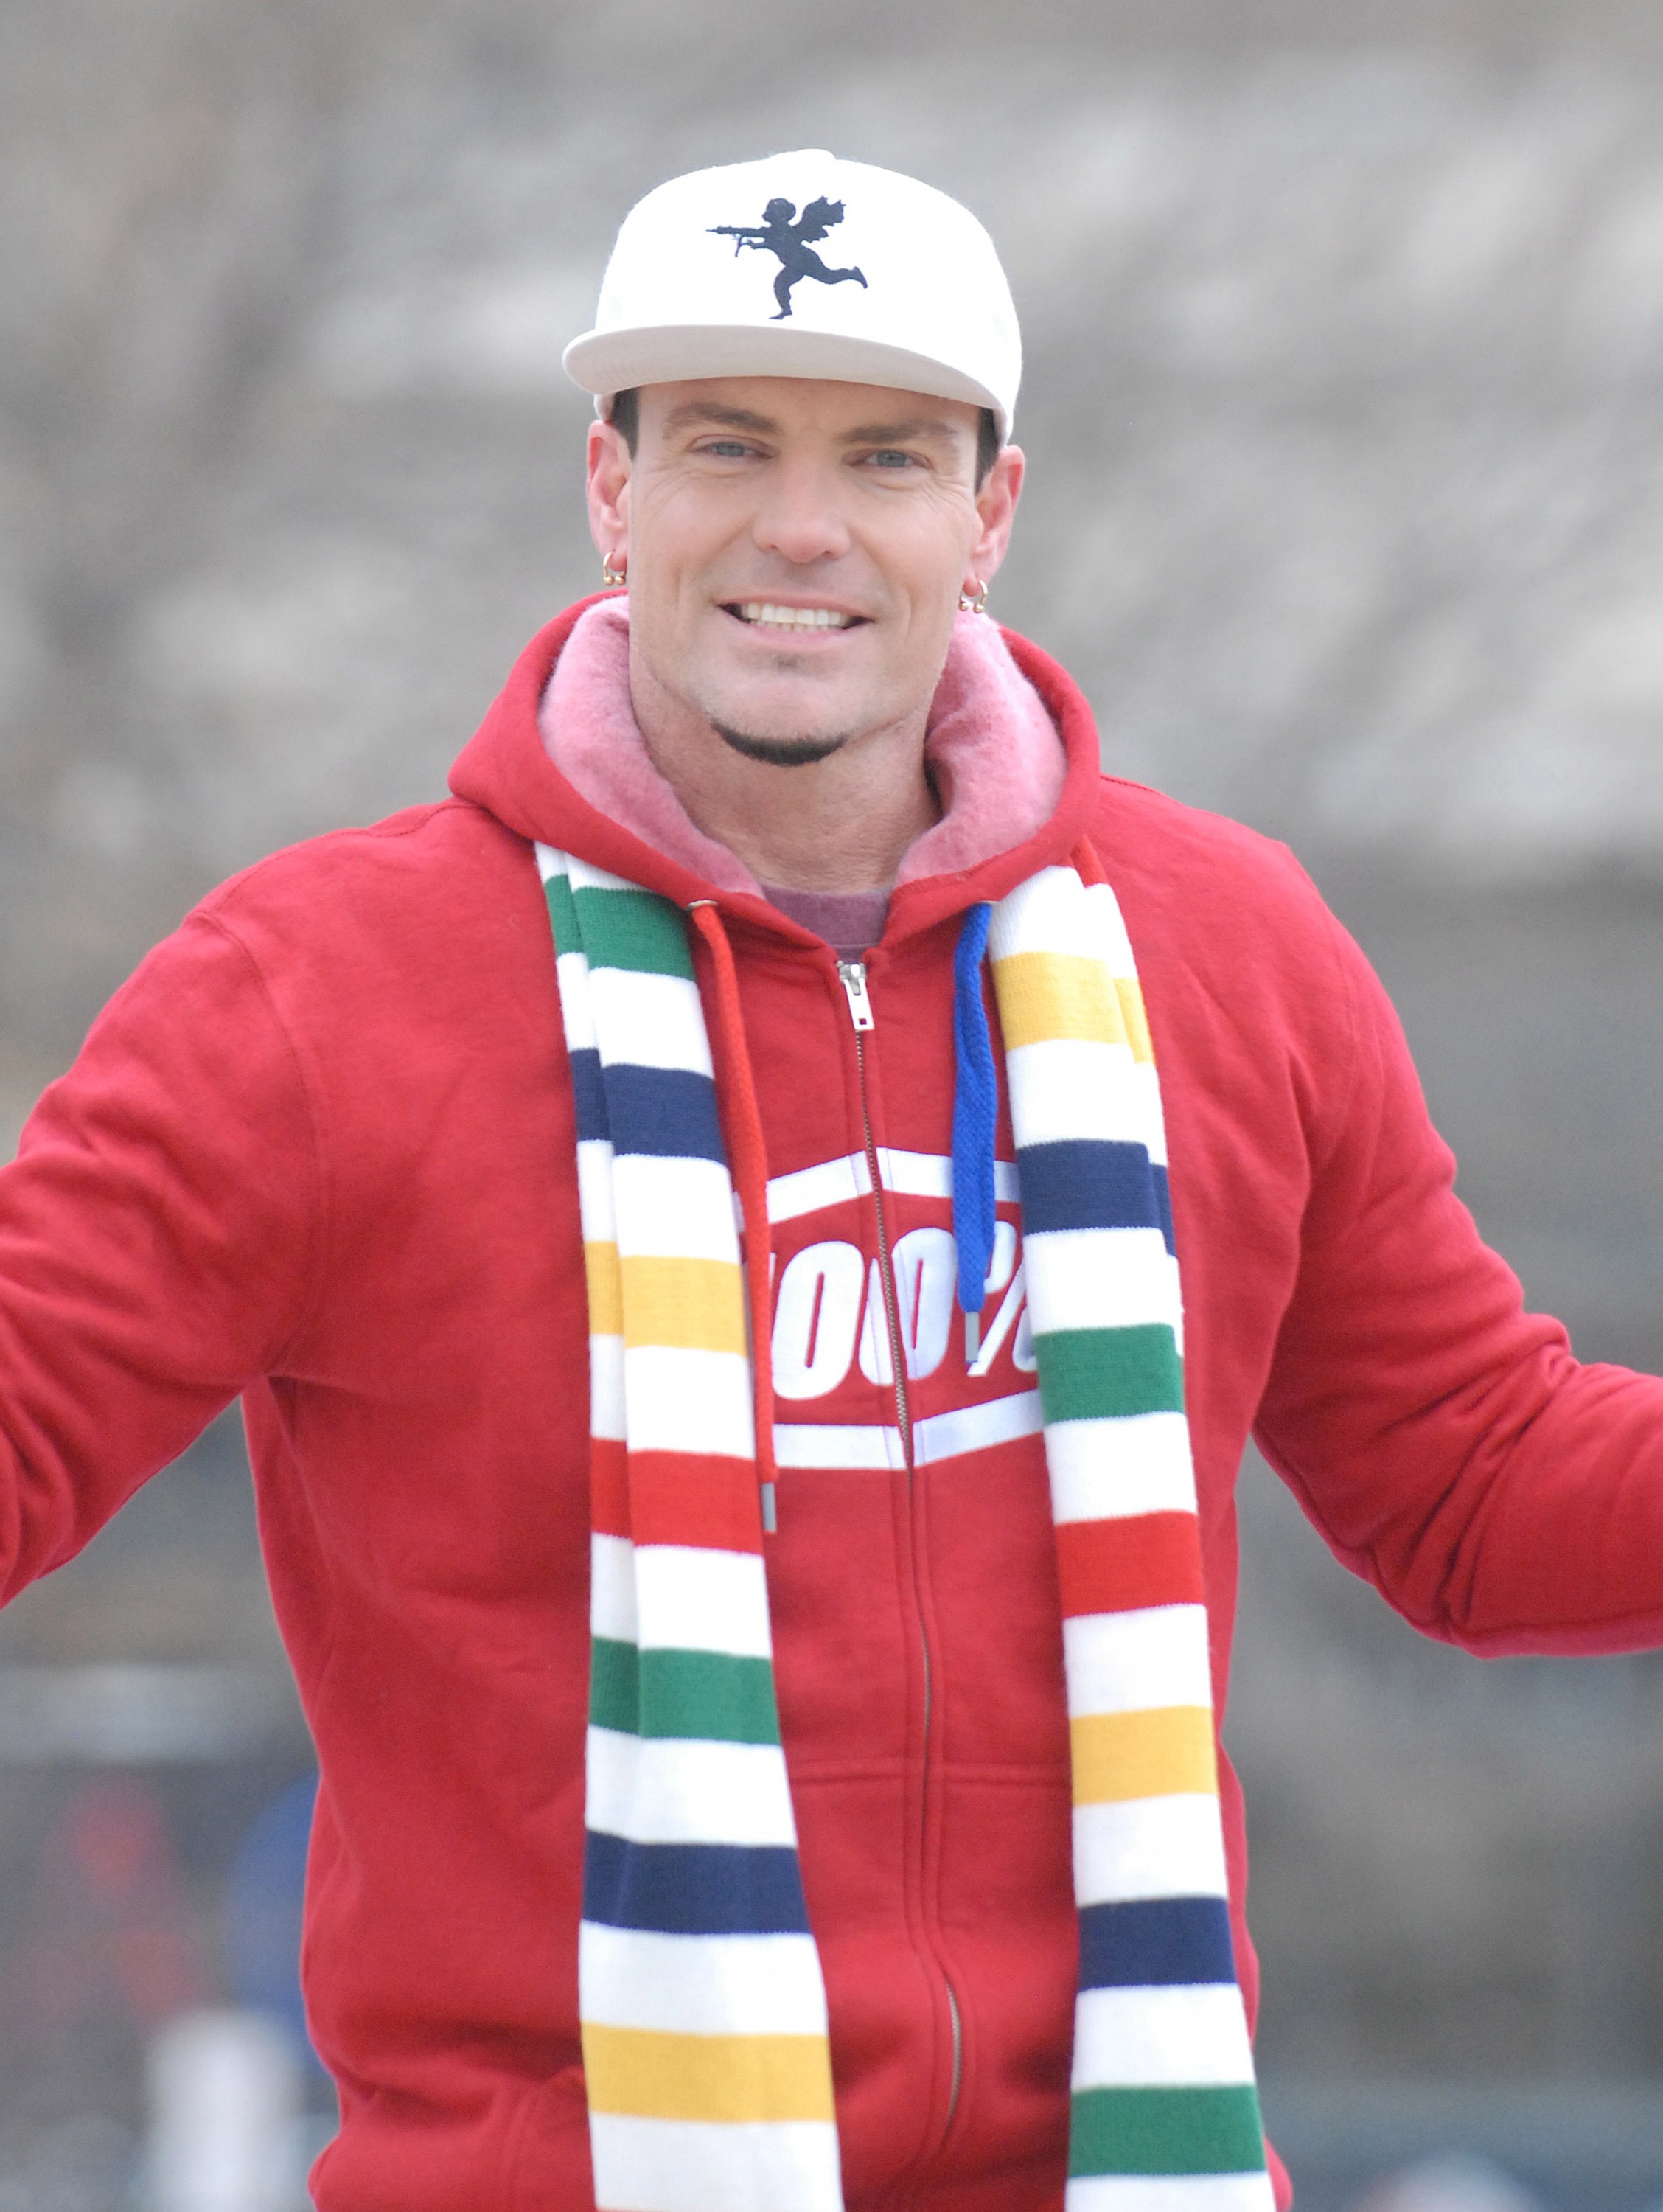 Vanilla Ice attends America's Thanksgiving's Day parade on November 27, 2014 in Detroit, Michigan. (Paul Warner&mdash;Getty Images)